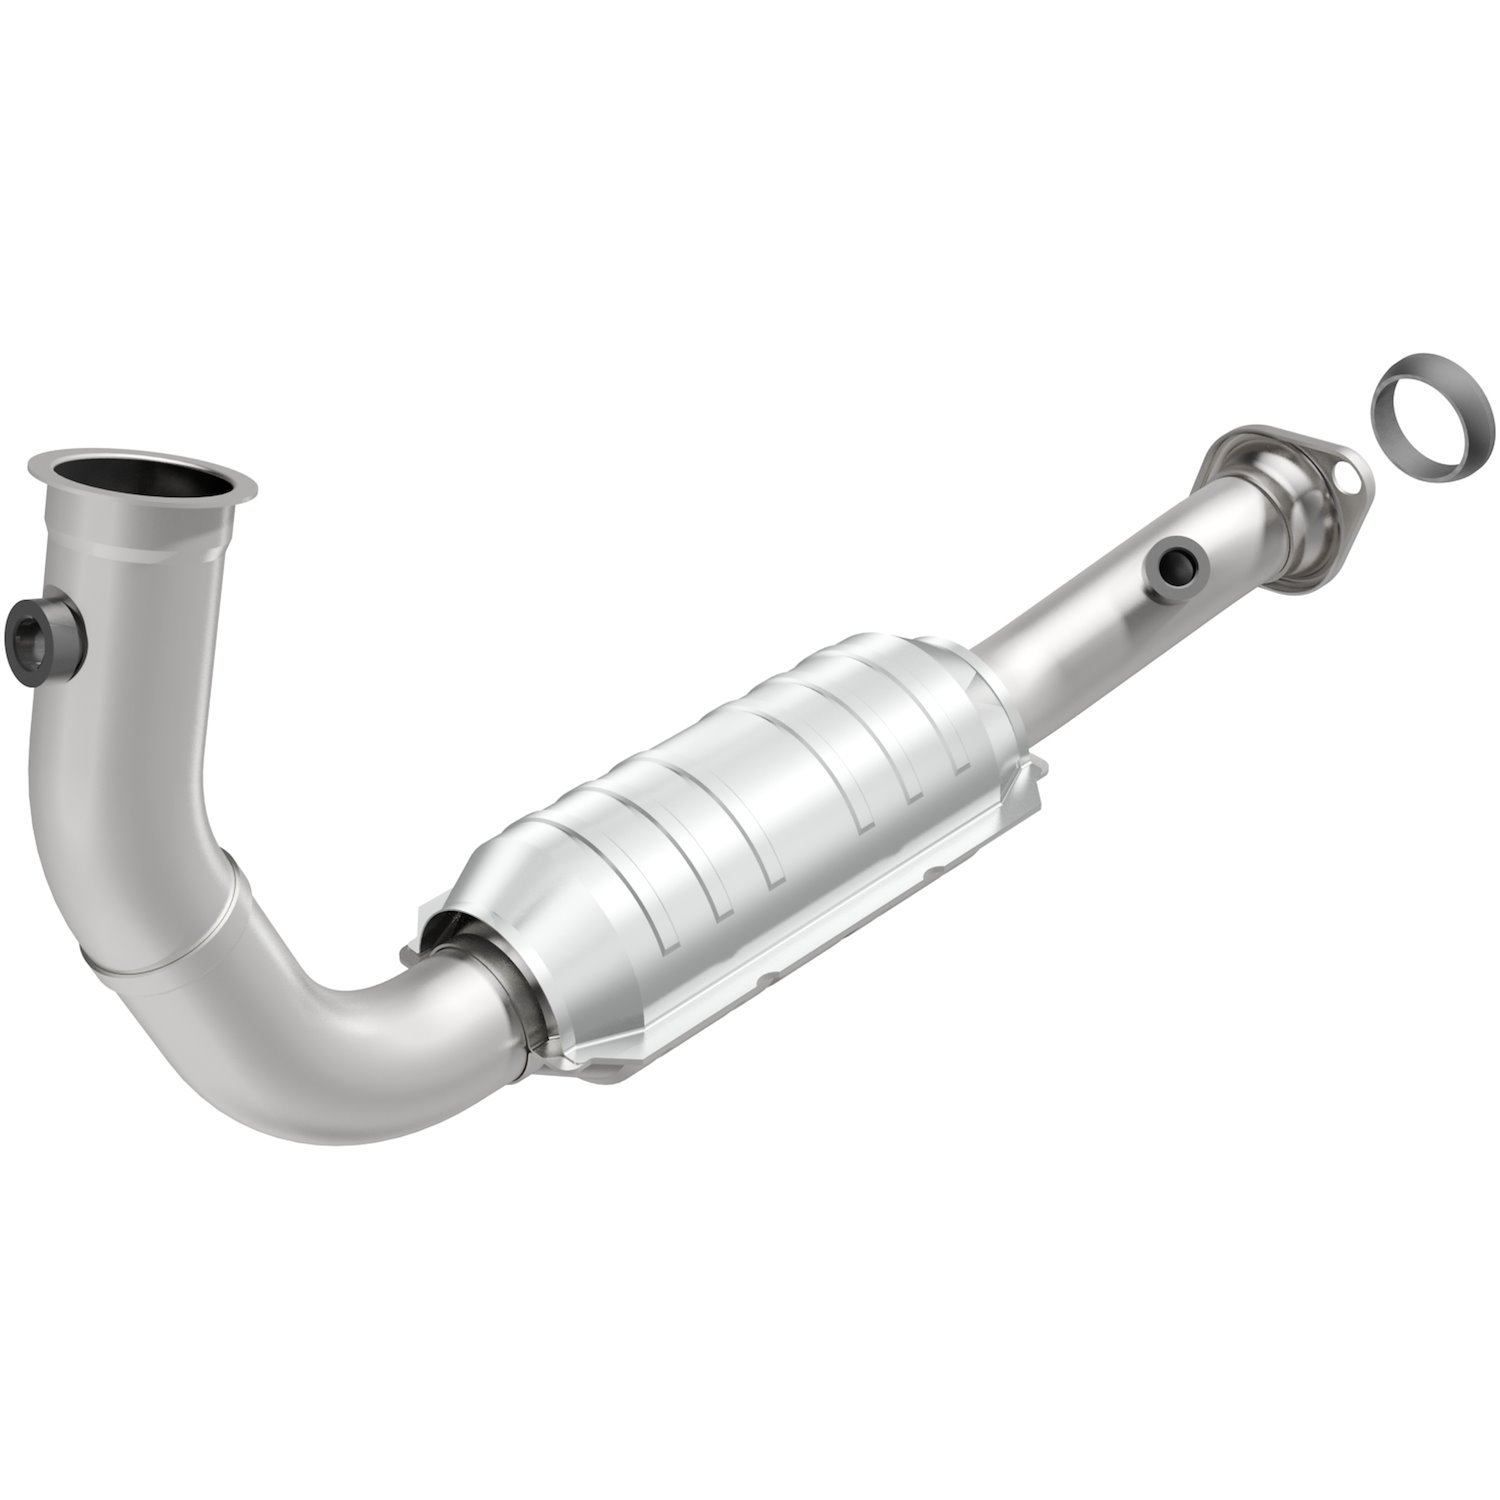 2004 Jeep Liberty OEM Grade Federal / EPA Compliant Direct-Fit Catalytic Converter